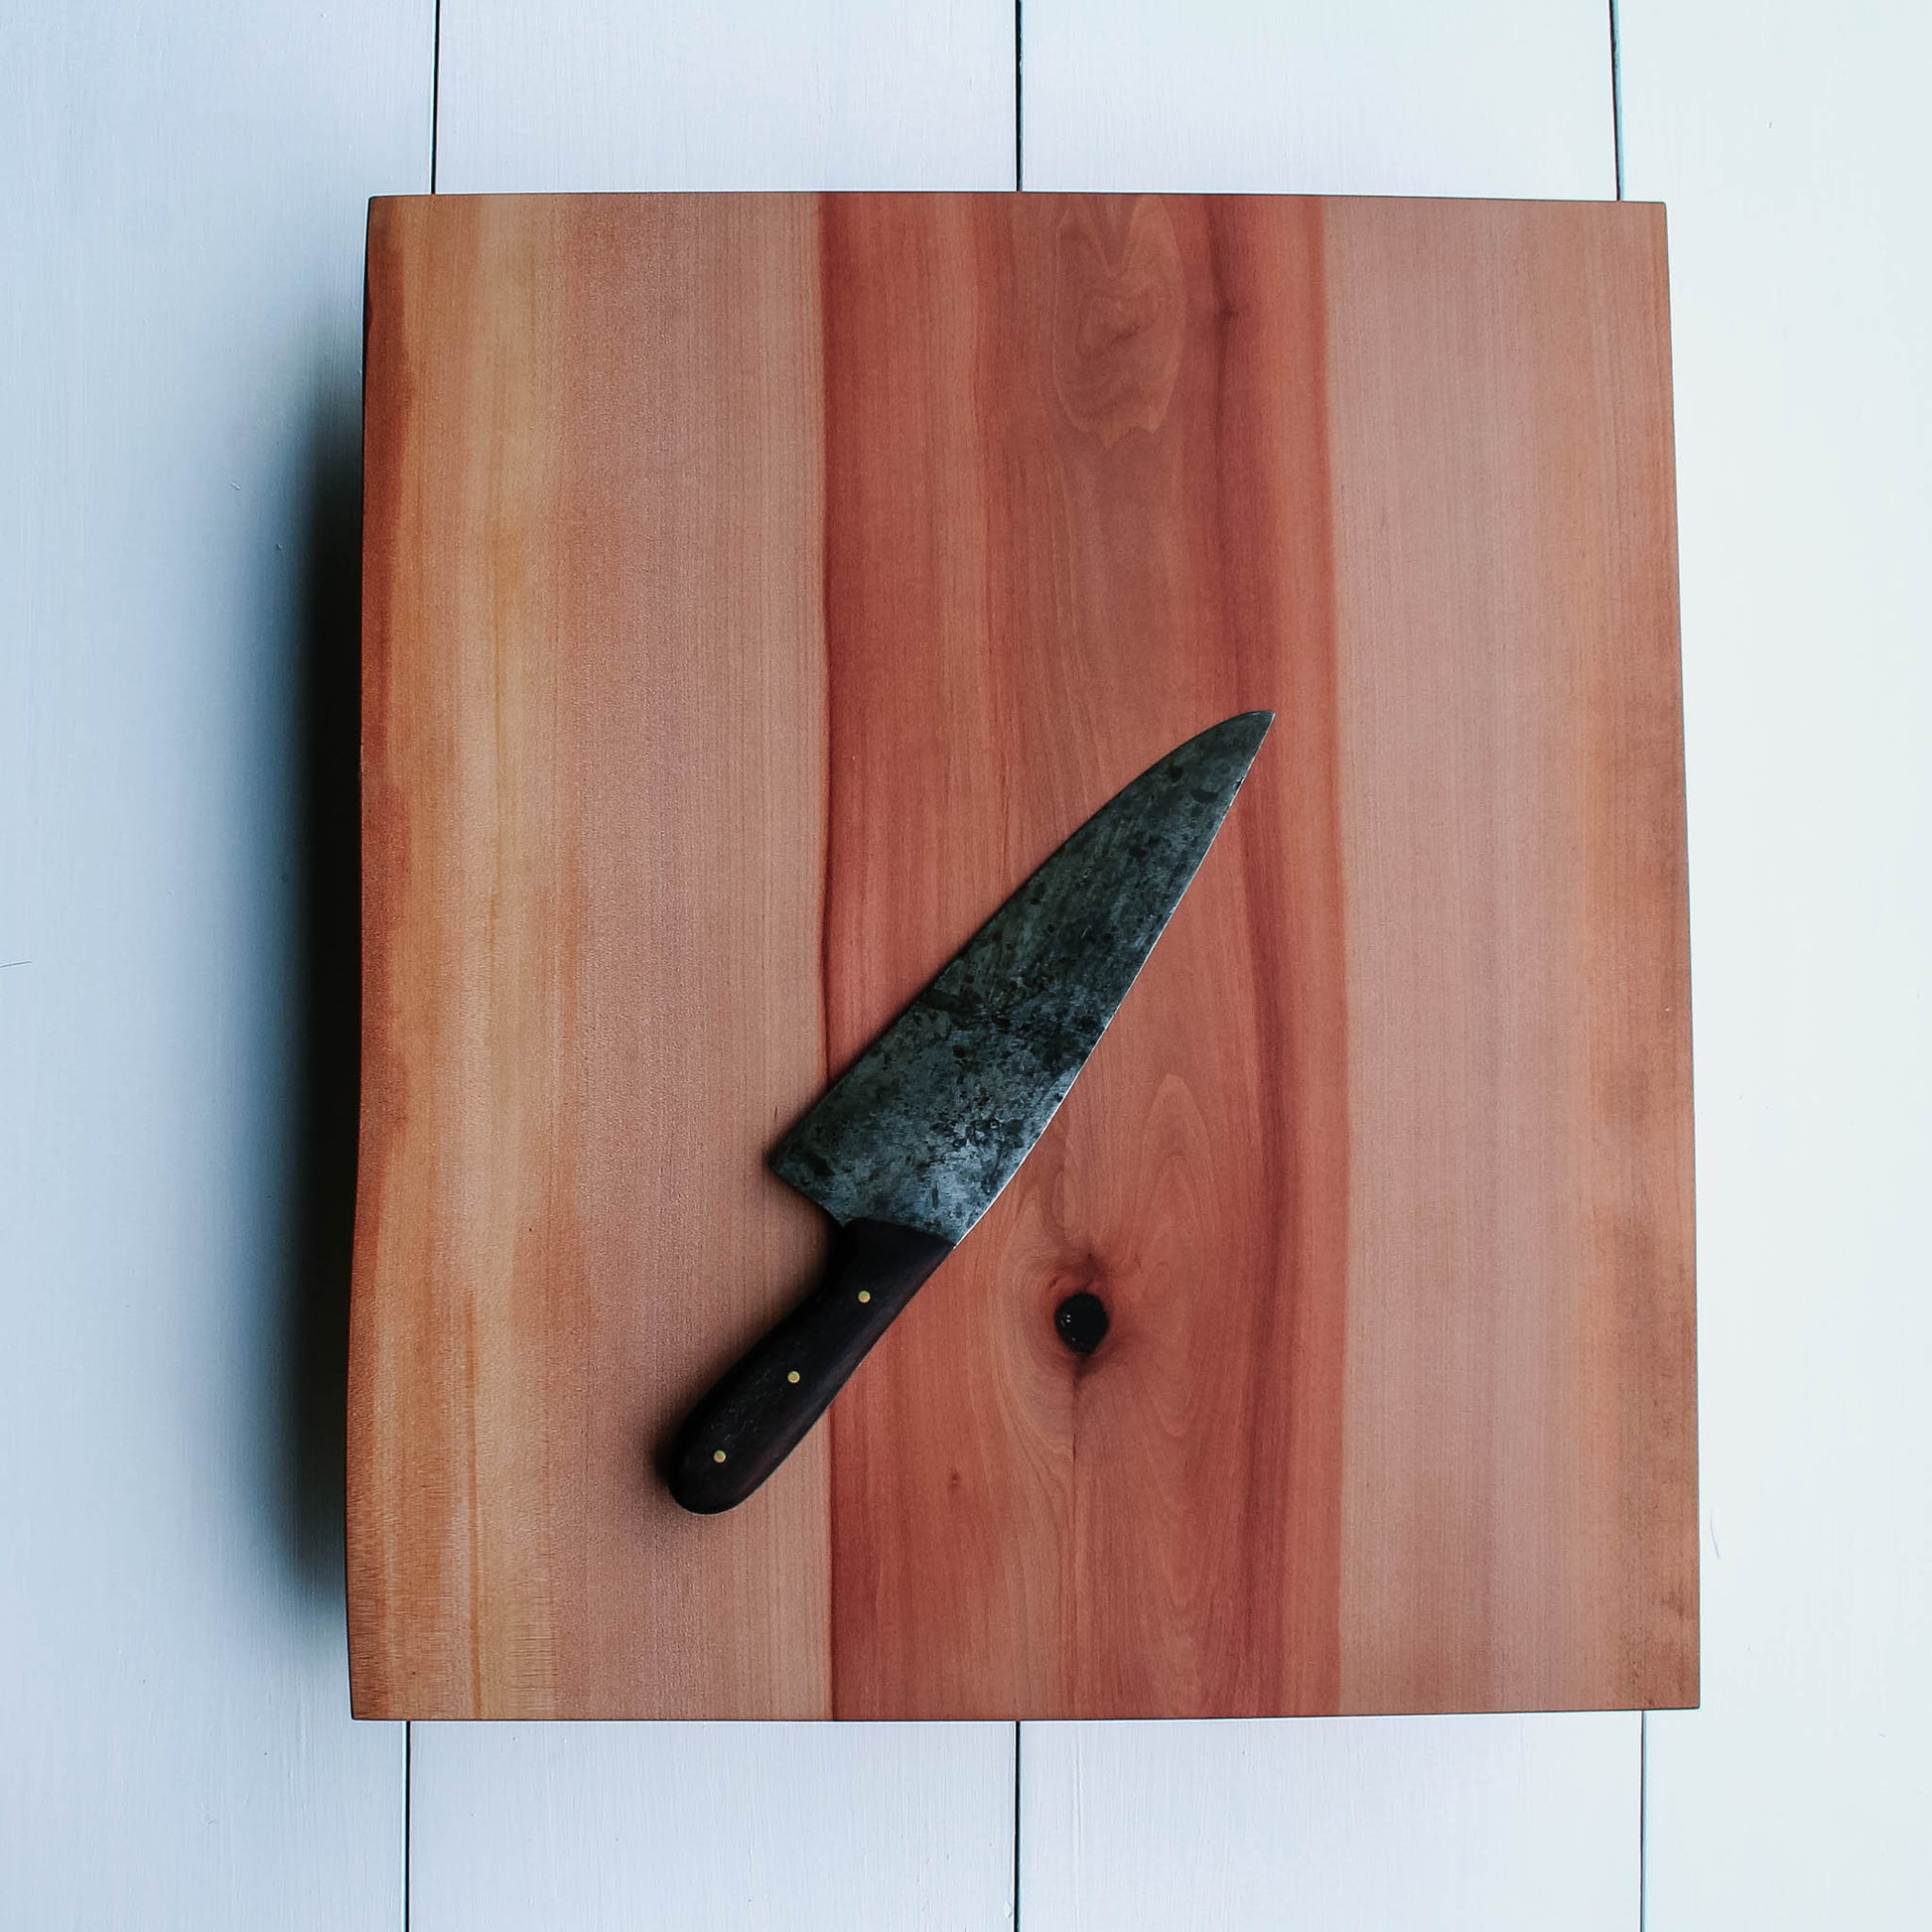 Madrone cutting board with beautiful grain, live edges and engraving